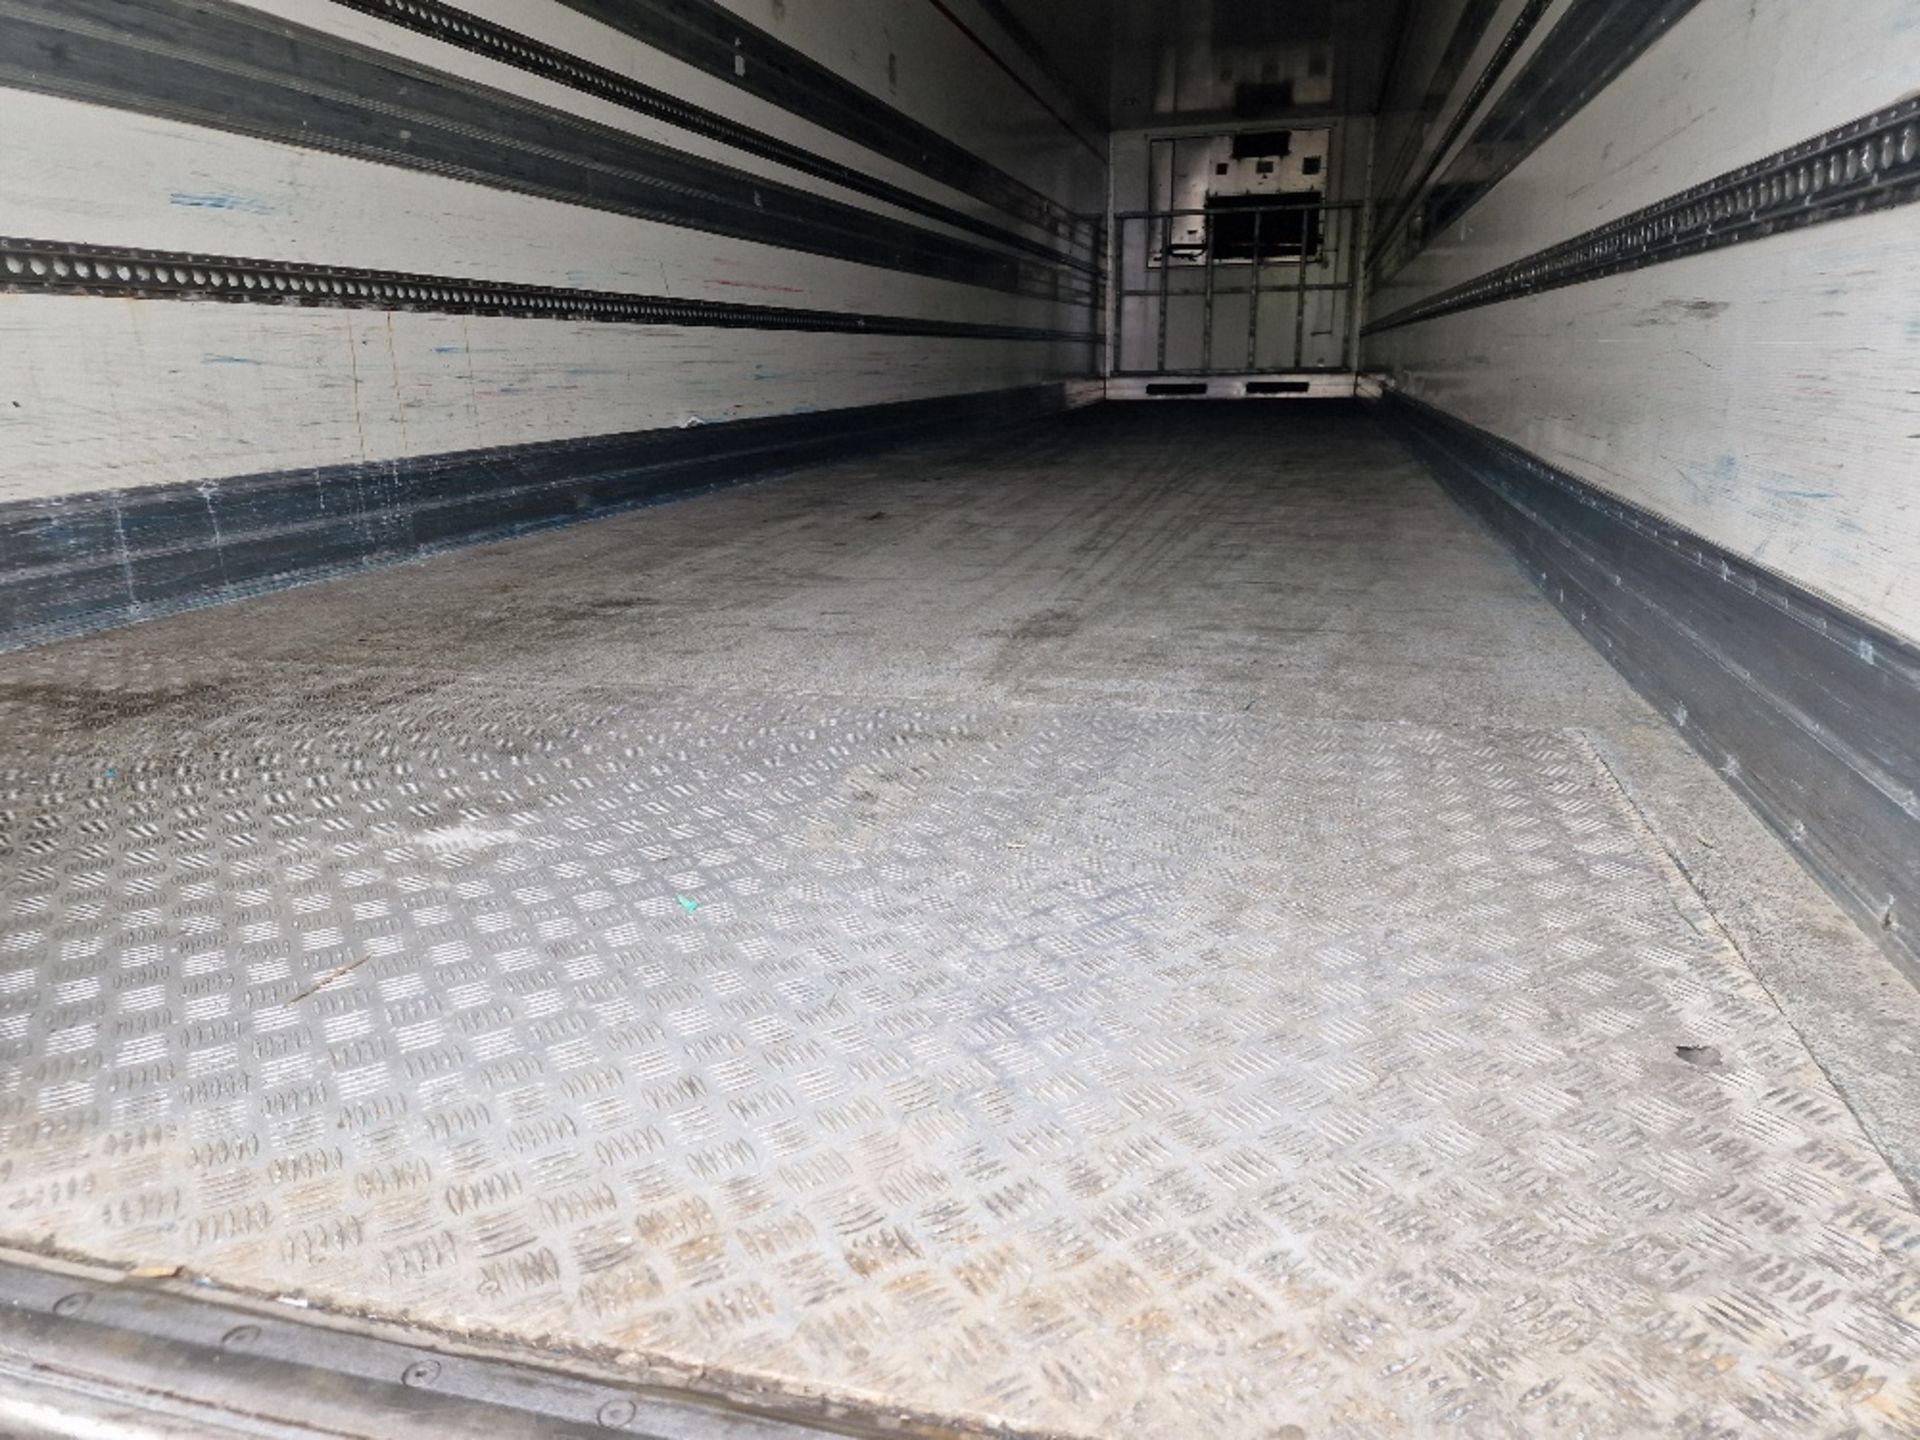 EF082 – 2009 Montracon 13.6m Refrigerated Trailer - Image 8 of 9